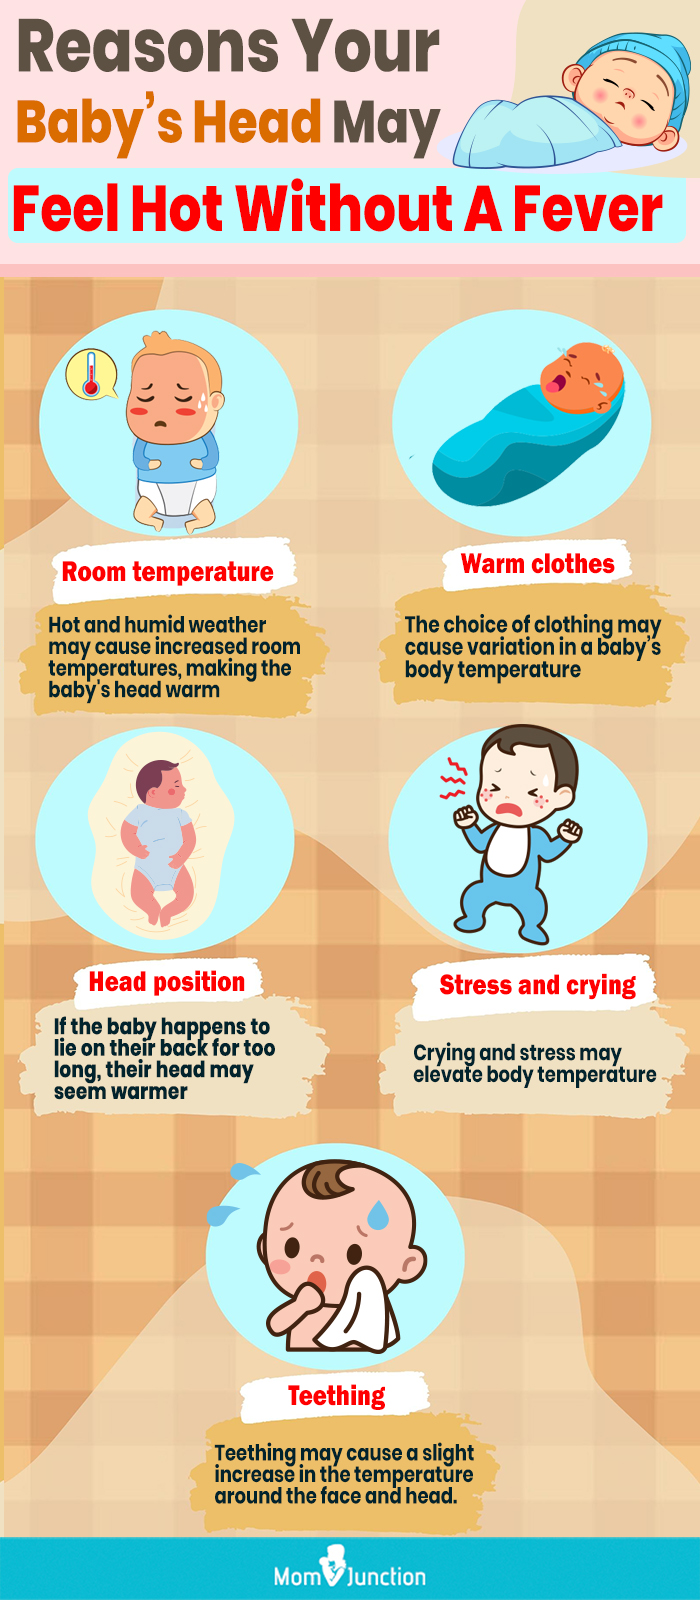 reasons your baby’s head may feel hot without a fever (infographic)